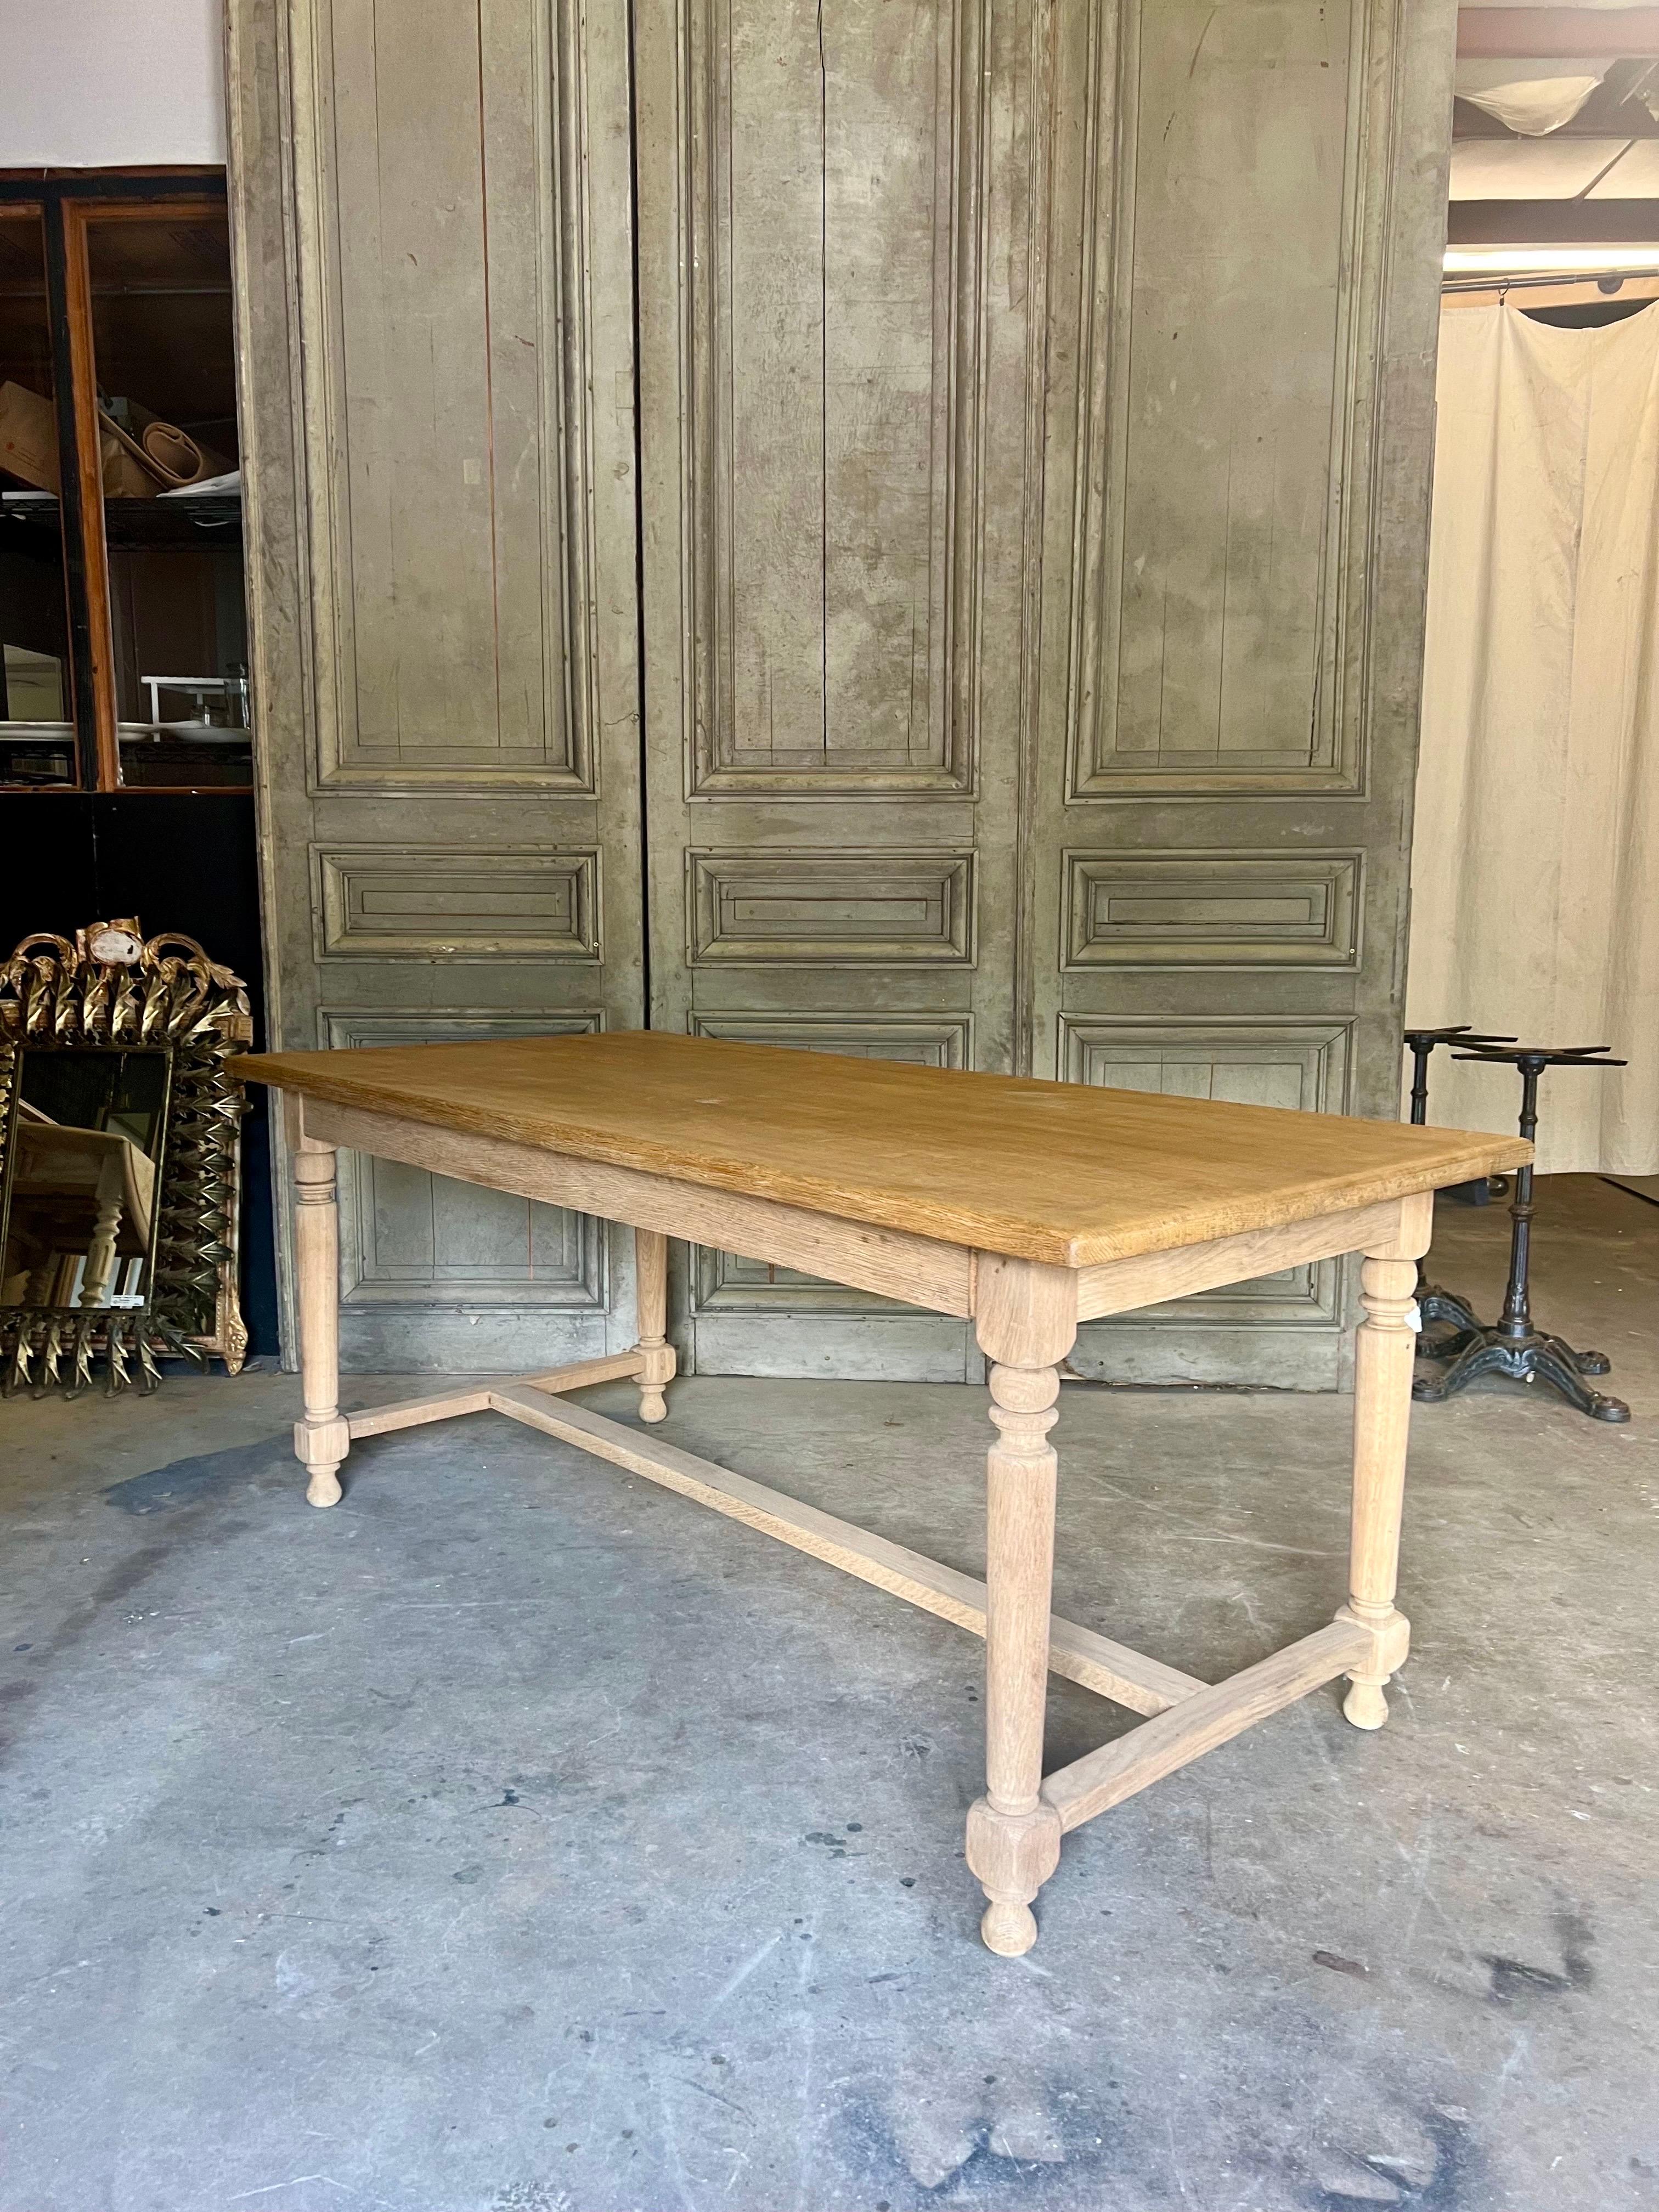 Handcrafted vintage French oak dining table that has been stripped exposing the lovely and durable hard wood.  Includes a protective polyacrylic coating on the top making it a useful every day table for dining.  Discovered recently in Northern